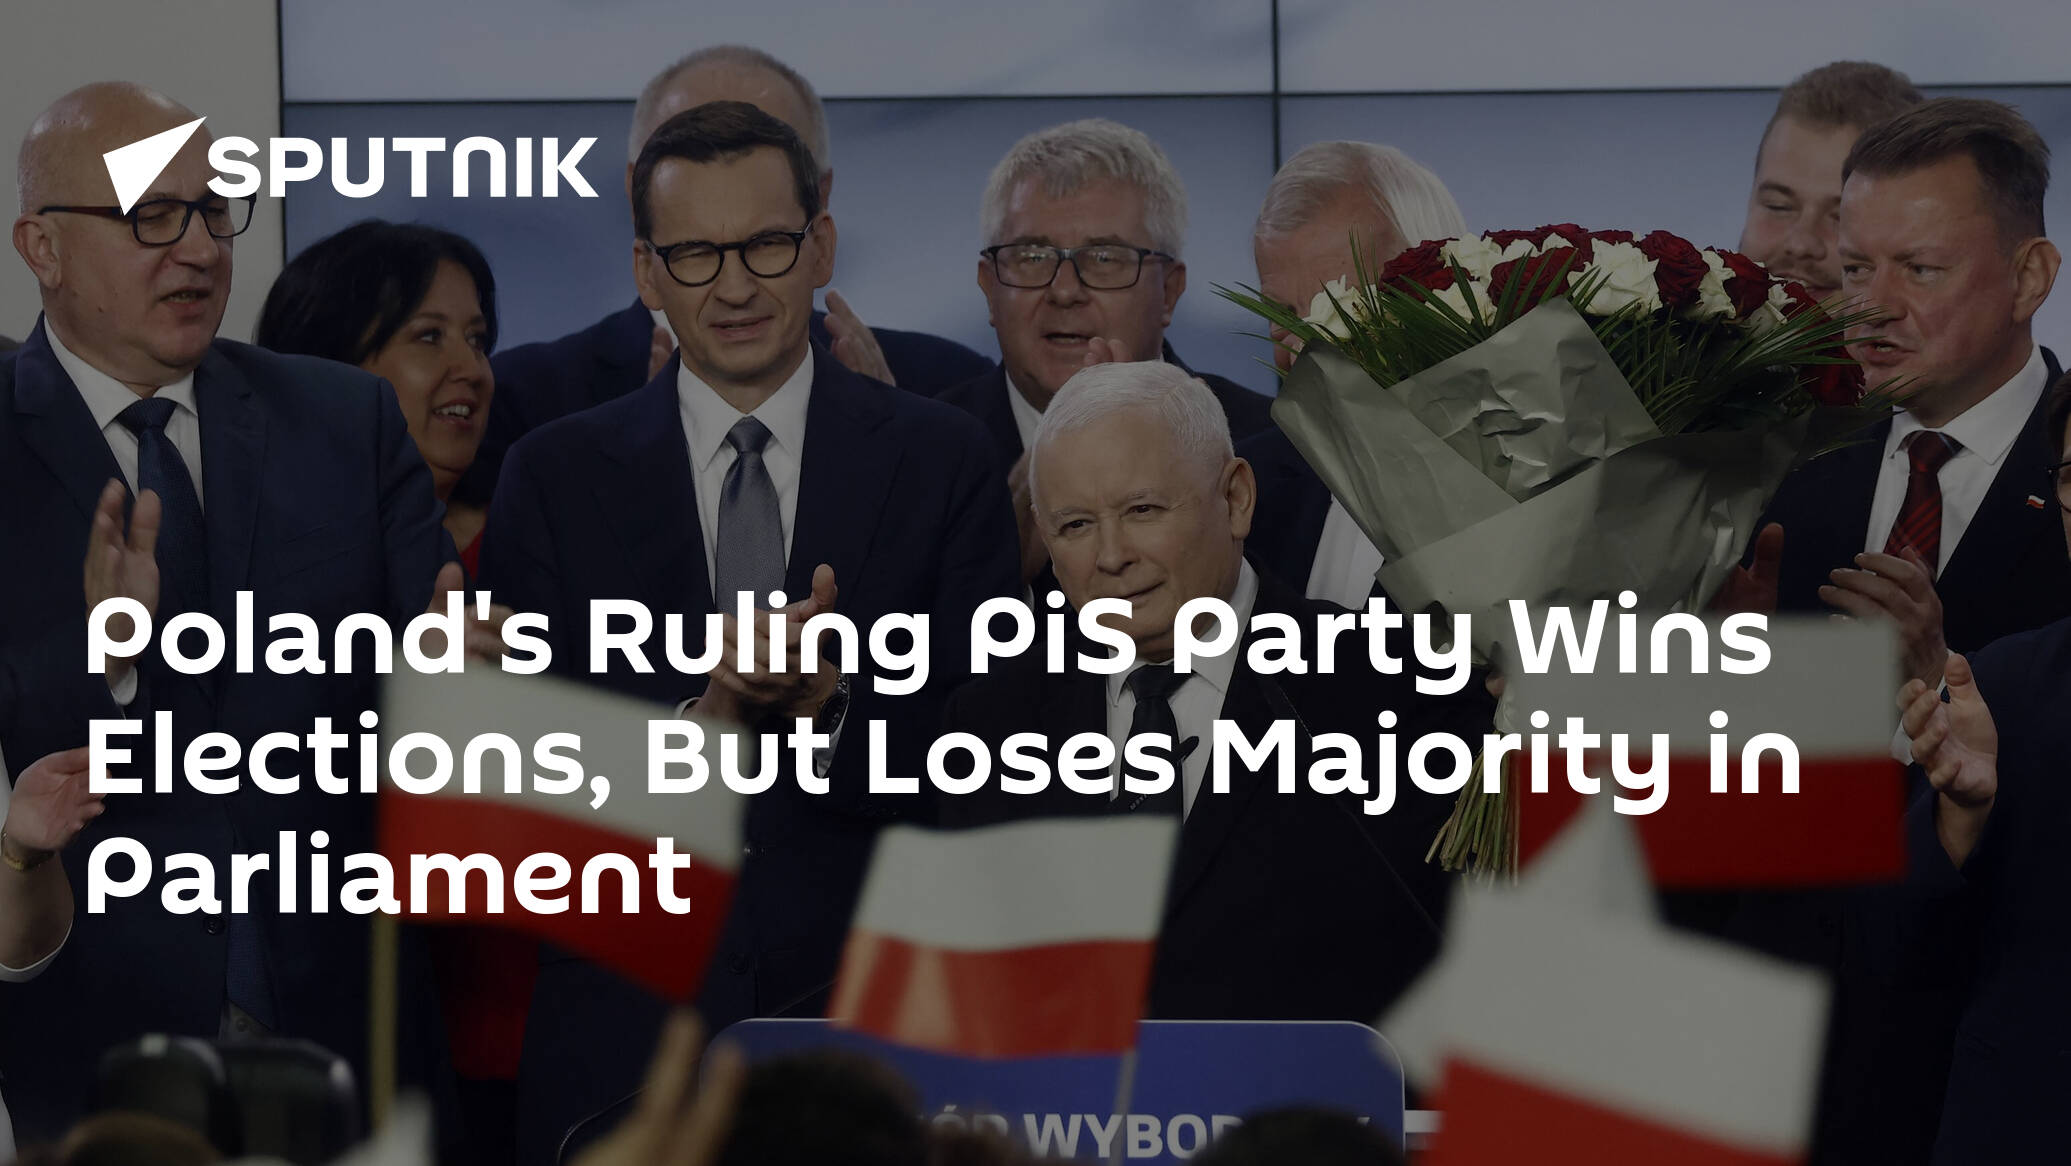 Poland's Ruling PiS Party Wins Elections, But Loses Majority in Parliament